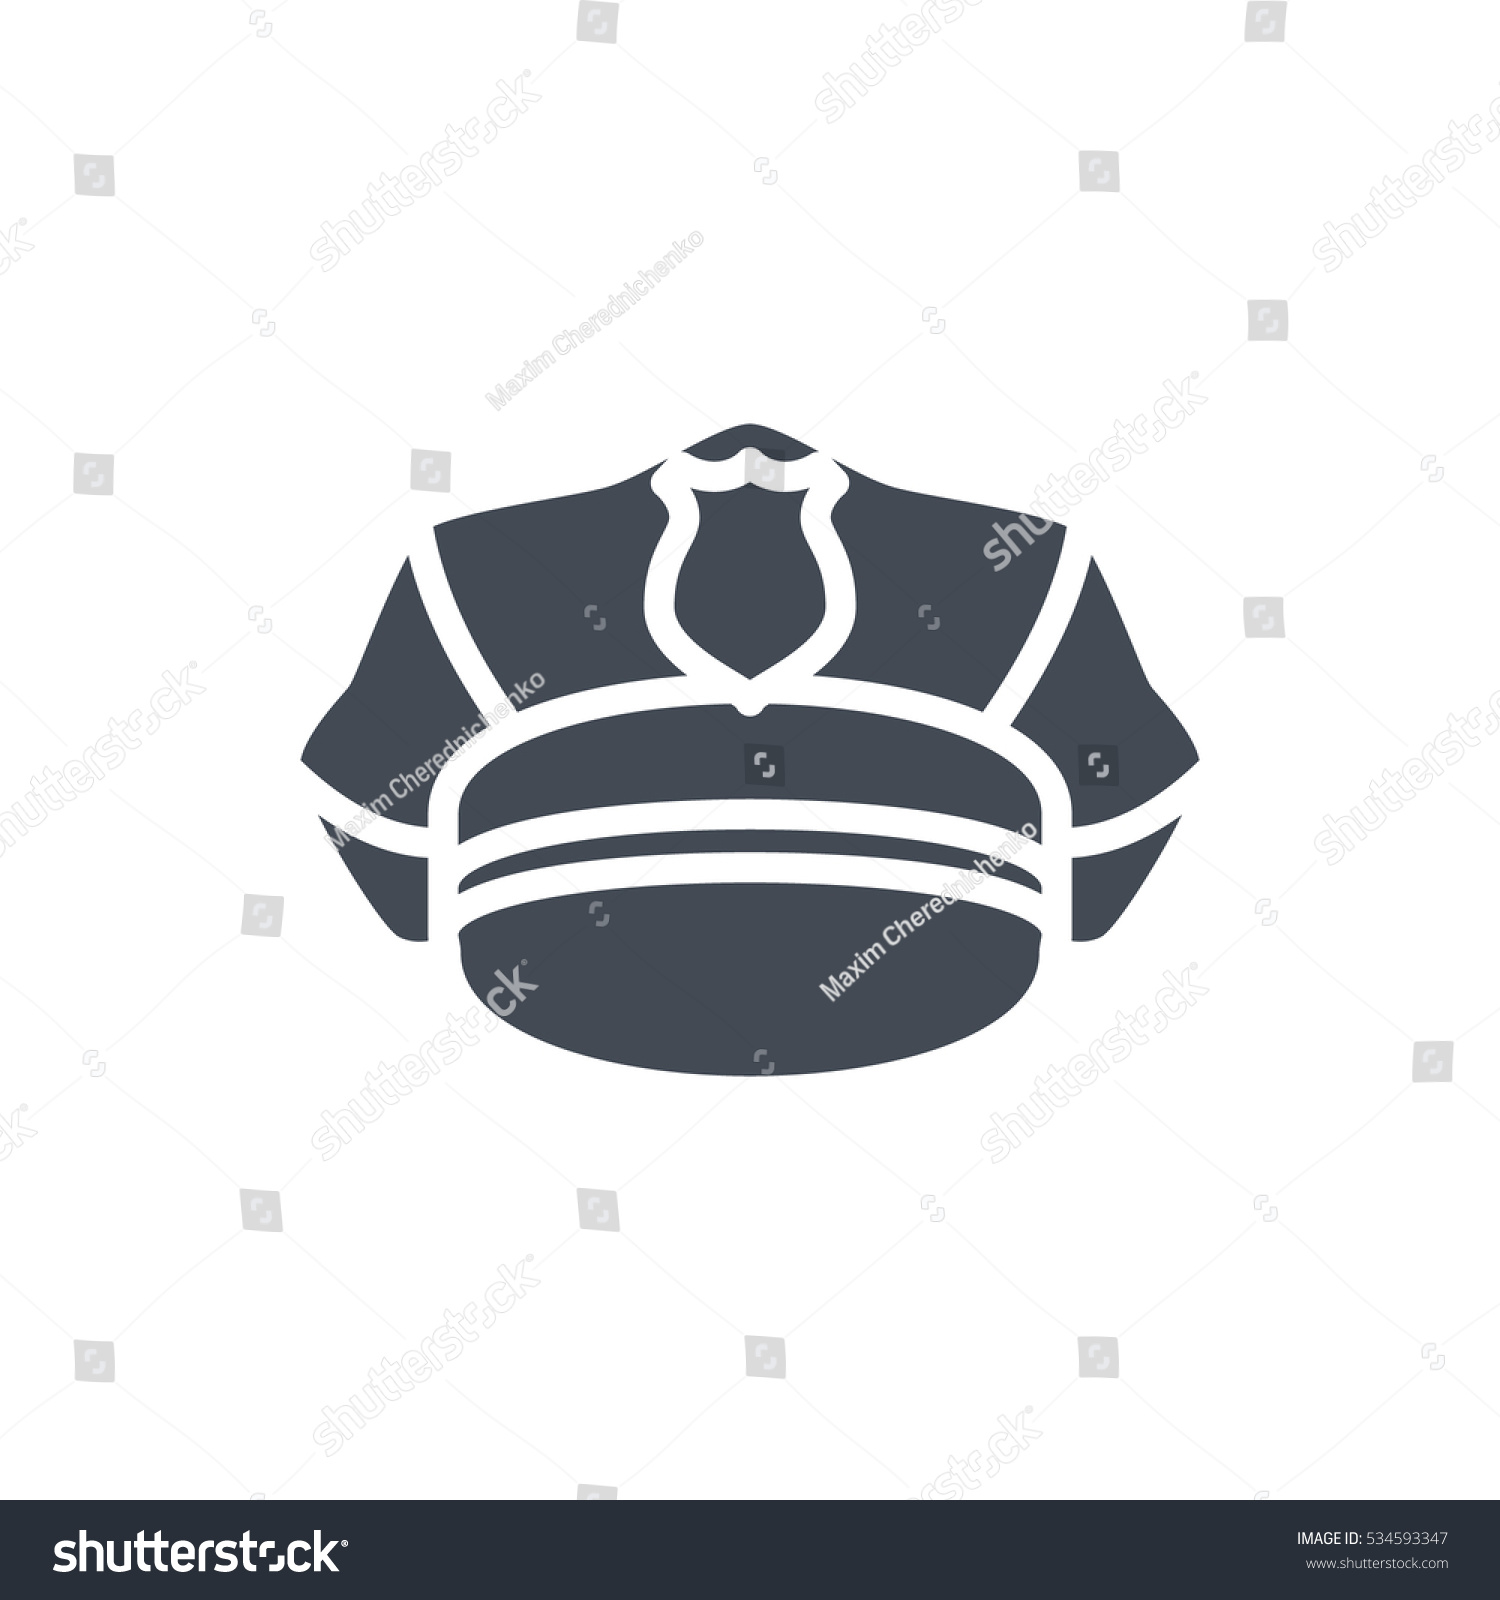 police hat clip art black and white - photo #41